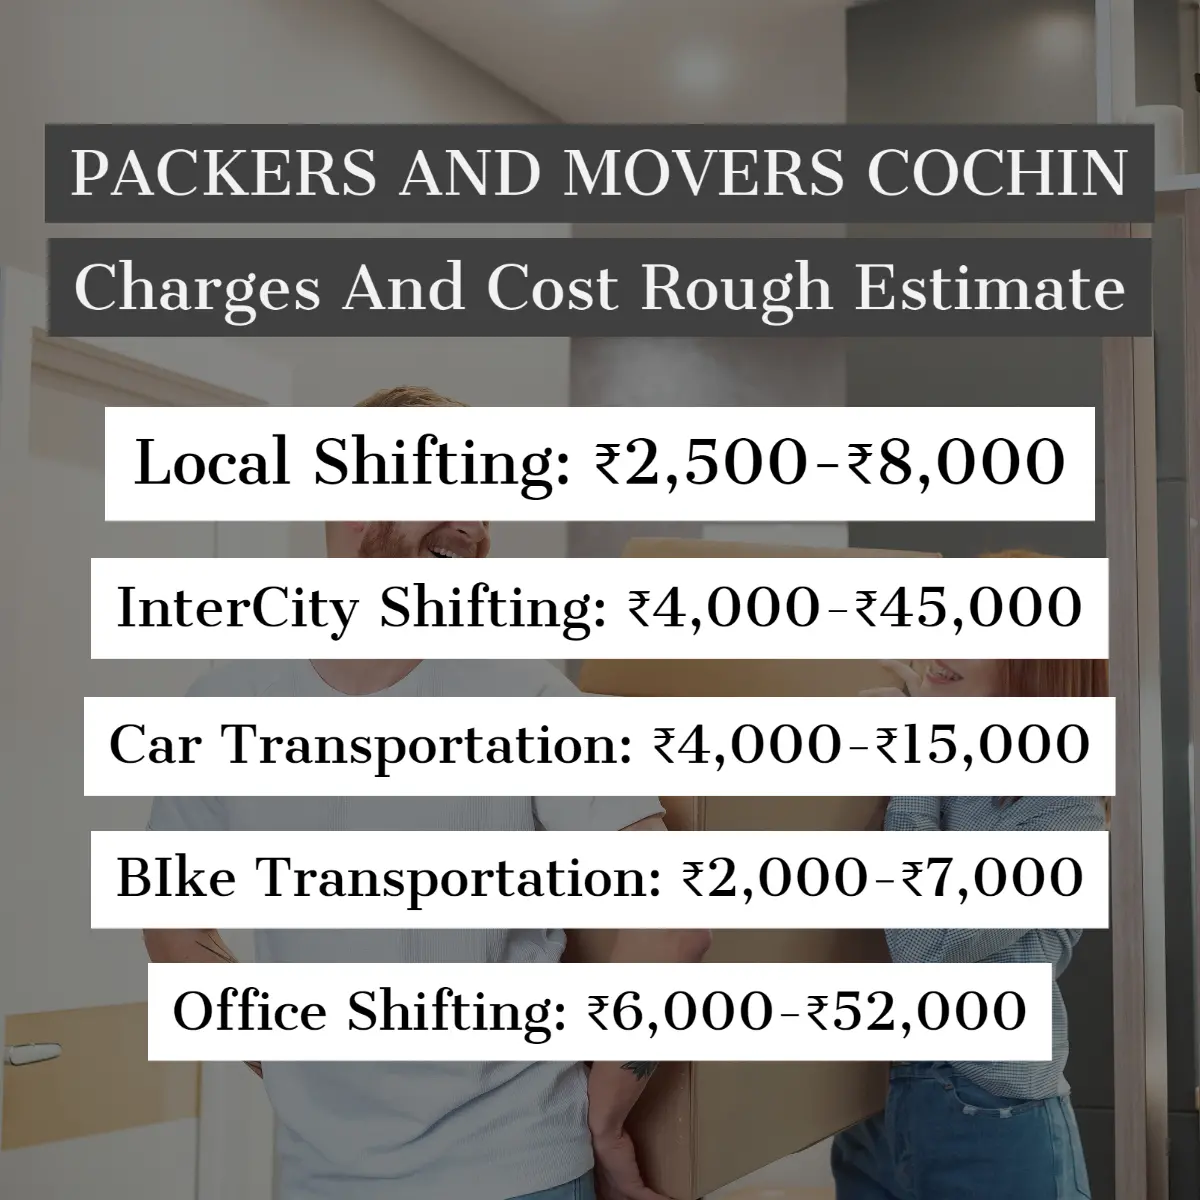 Packers and Movers Kochi (Cochin) Charges